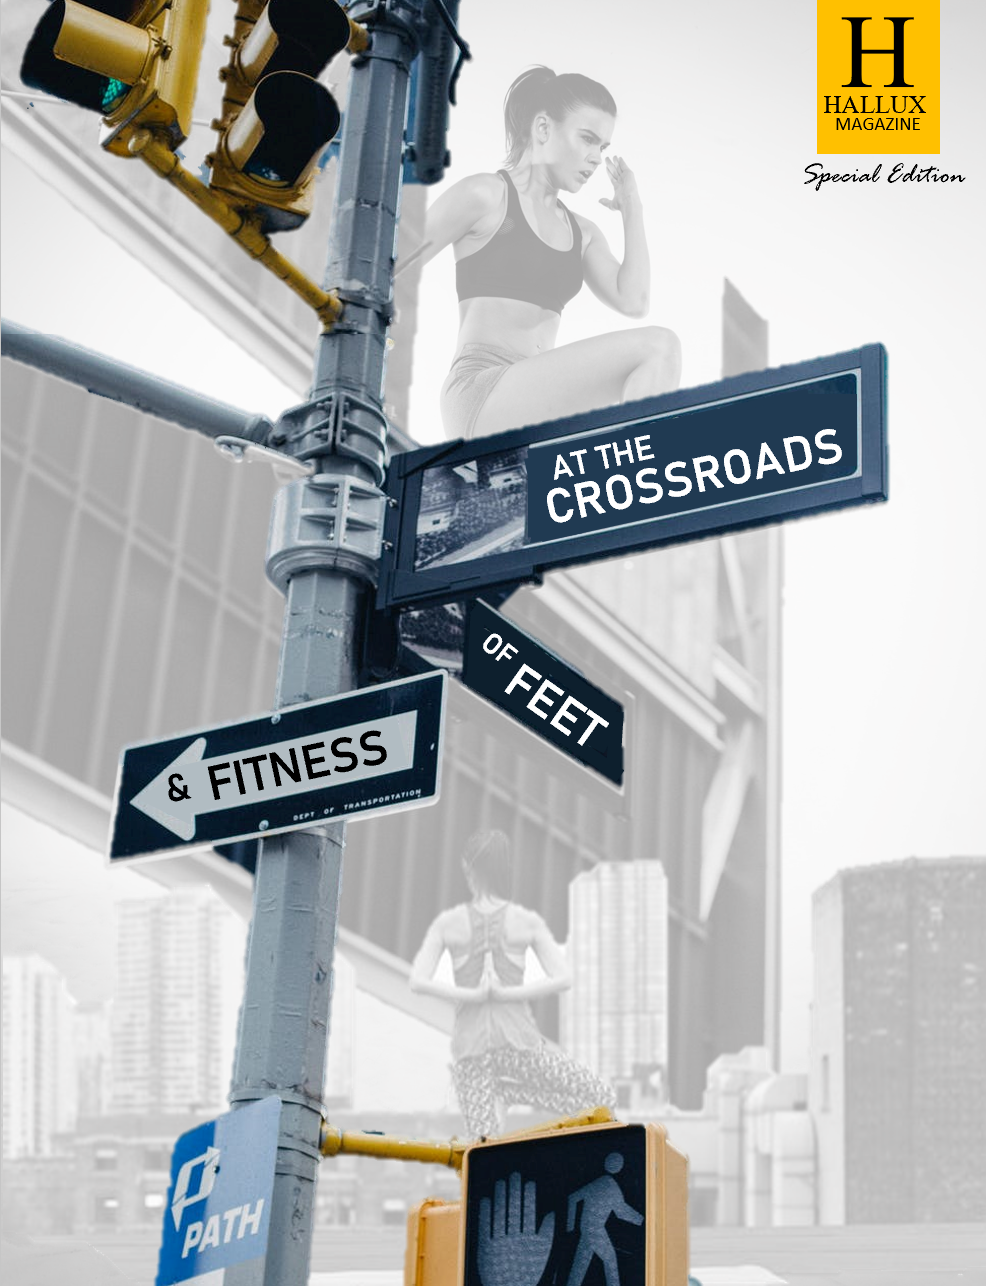 At the Crossroads of Feet & Fitness: Special Edition